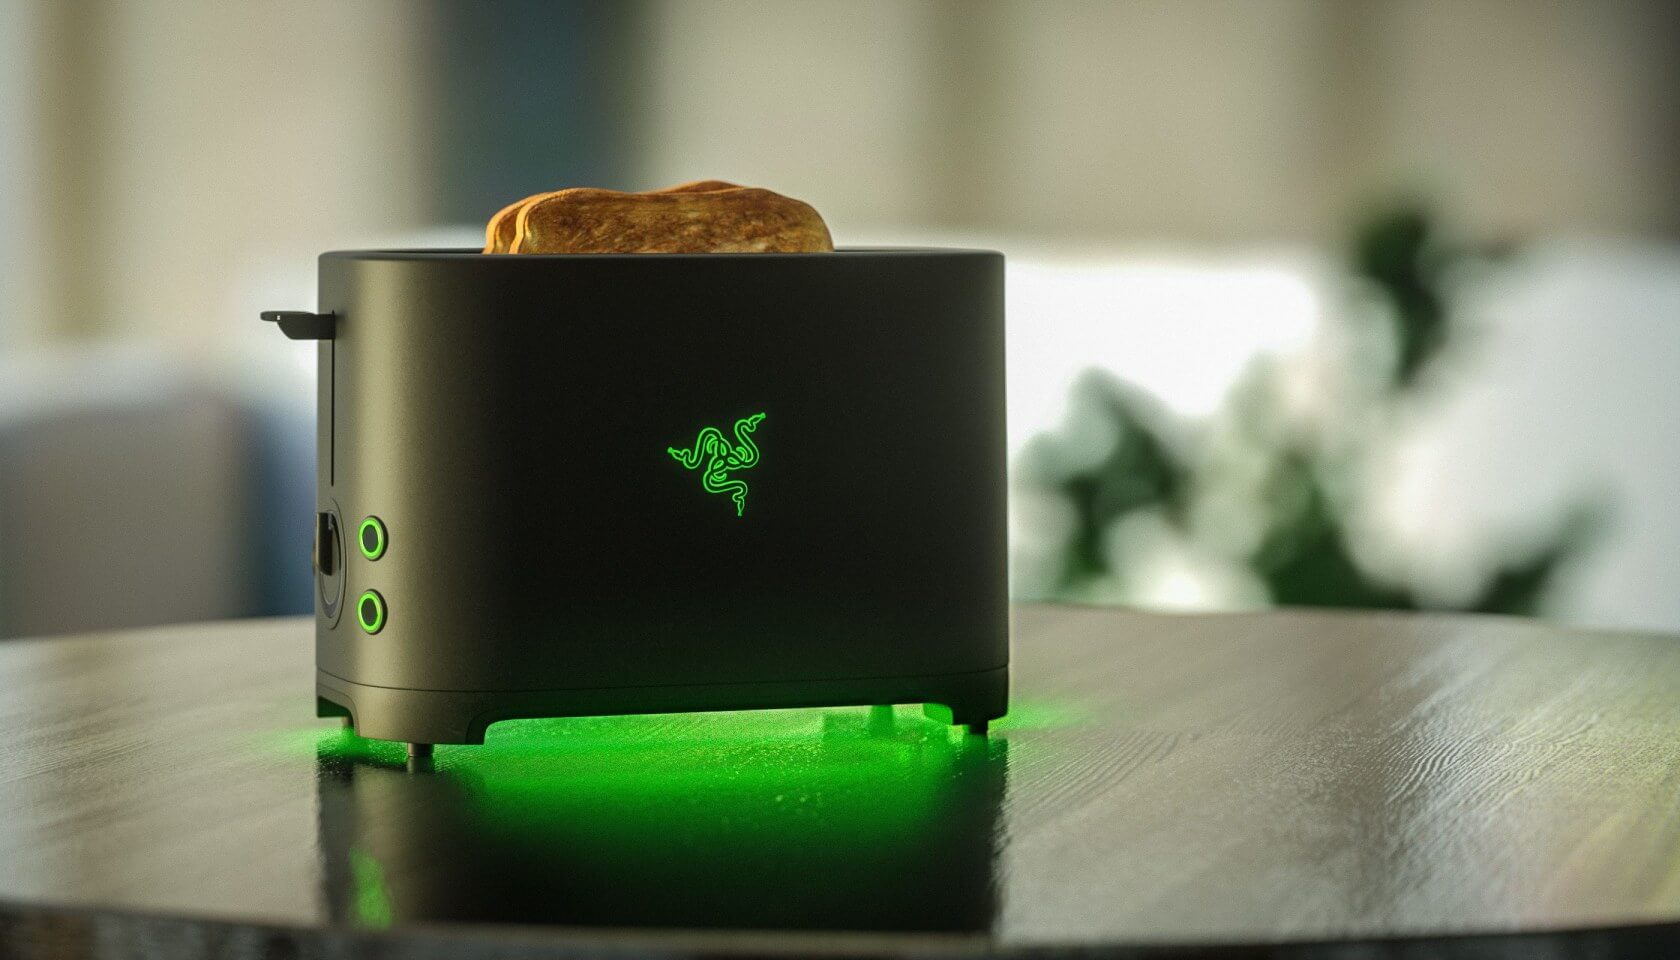 Razer is turning its 'Razer Toaster' April Fool's joke into a real product